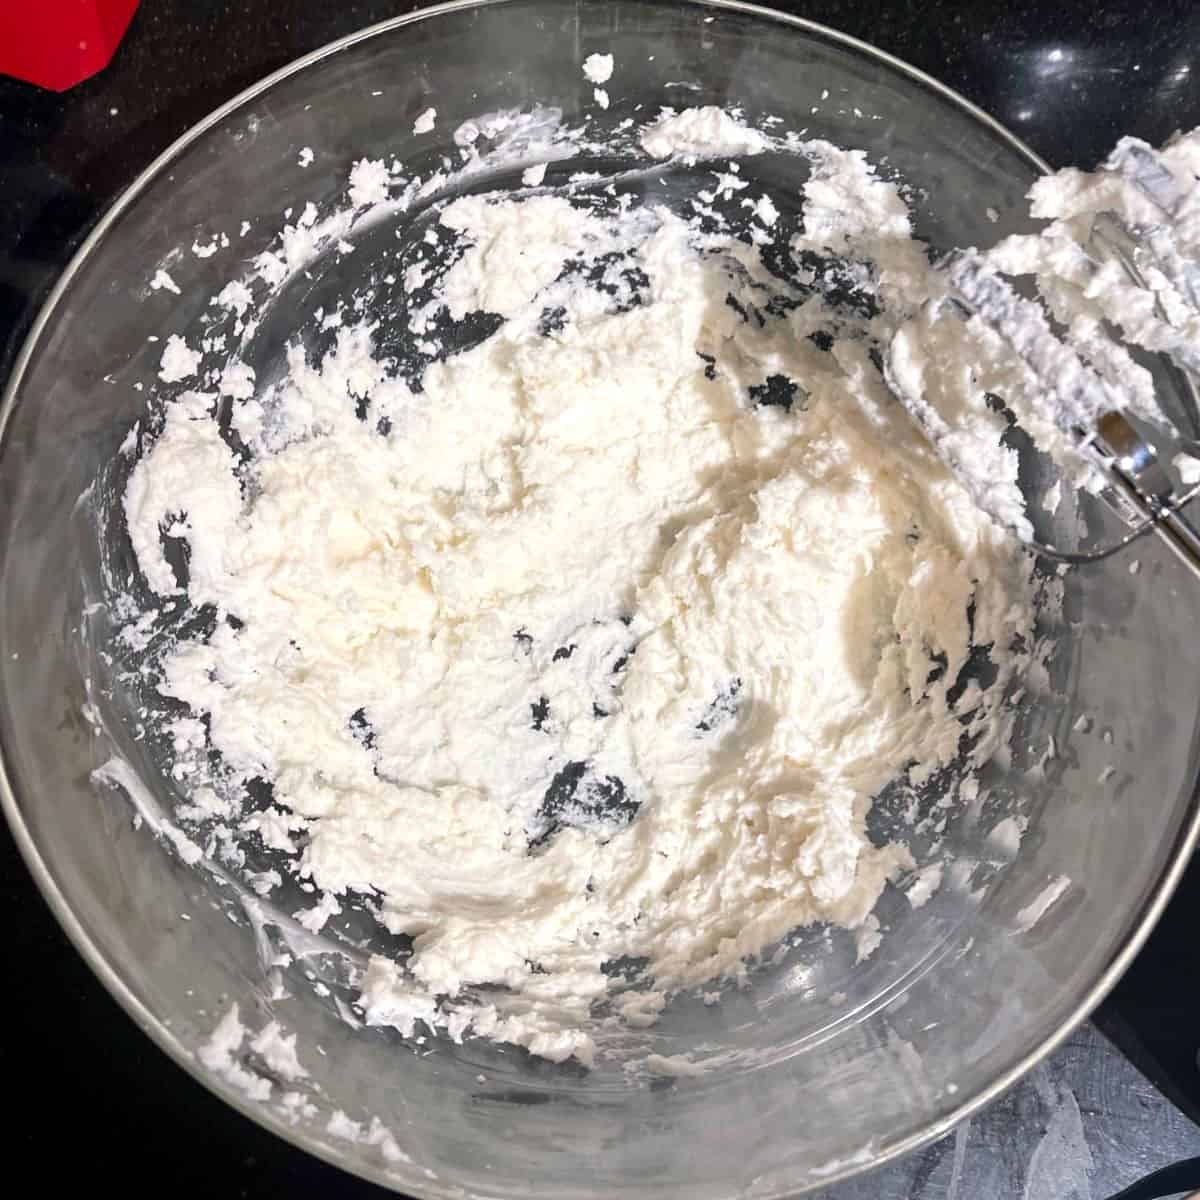 Vegan butter and cream cheese creamed together in bowl.